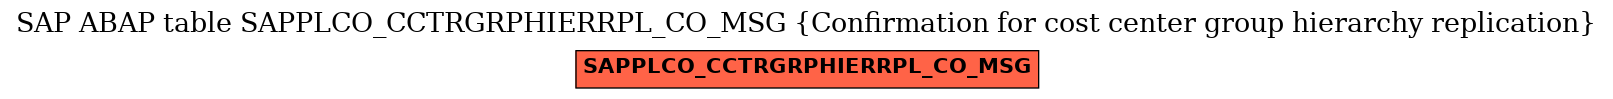 E-R Diagram for table SAPPLCO_CCTRGRPHIERRPL_CO_MSG (Confirmation for cost center group hierarchy replication)